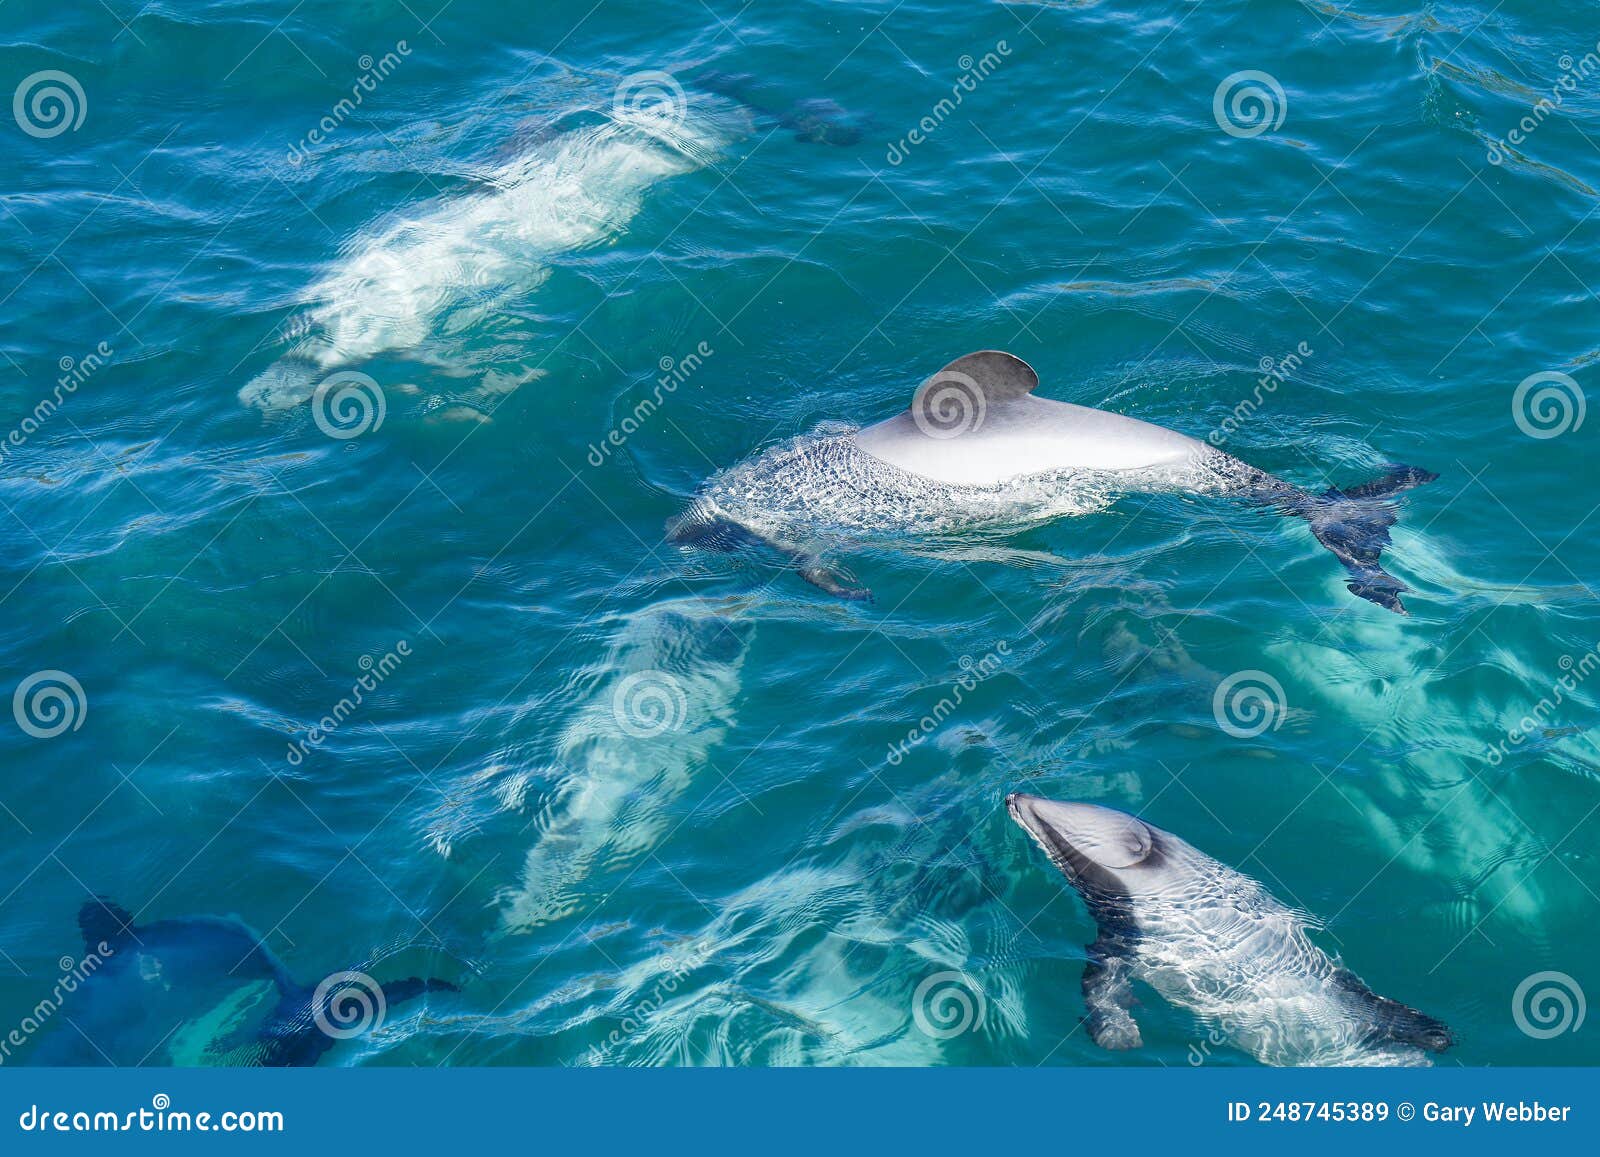 a pod of hectors dolphins, endangered dolphin, new zealand. cetacean endemic to new zealand